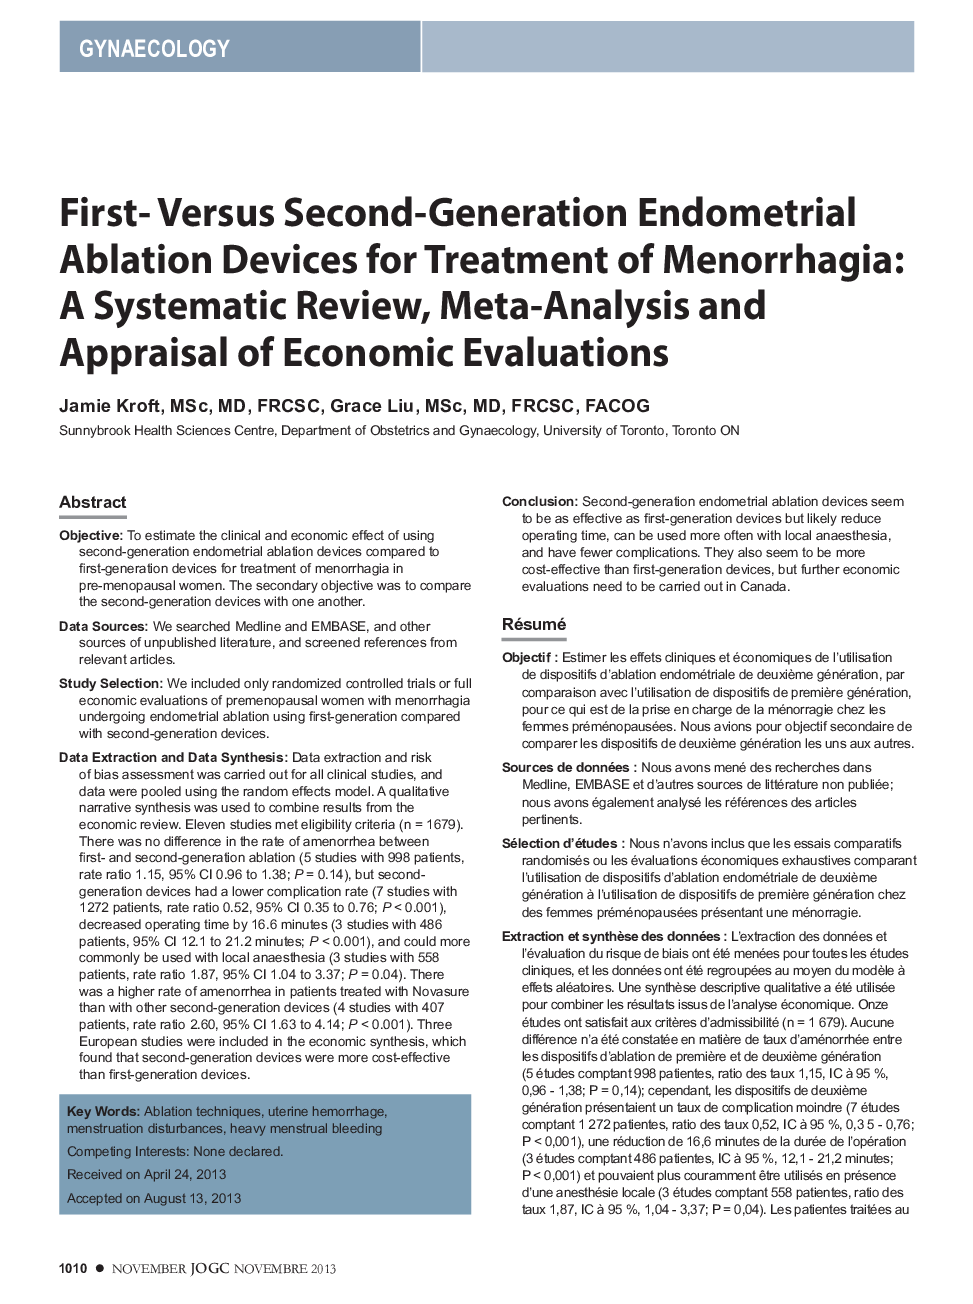 First- Versus Second-Generation Endometrial Ablation Devices for Treatment of Menorrhagia: A Systematic Review, Meta-Analysis and Appraisal of Economic Evaluations